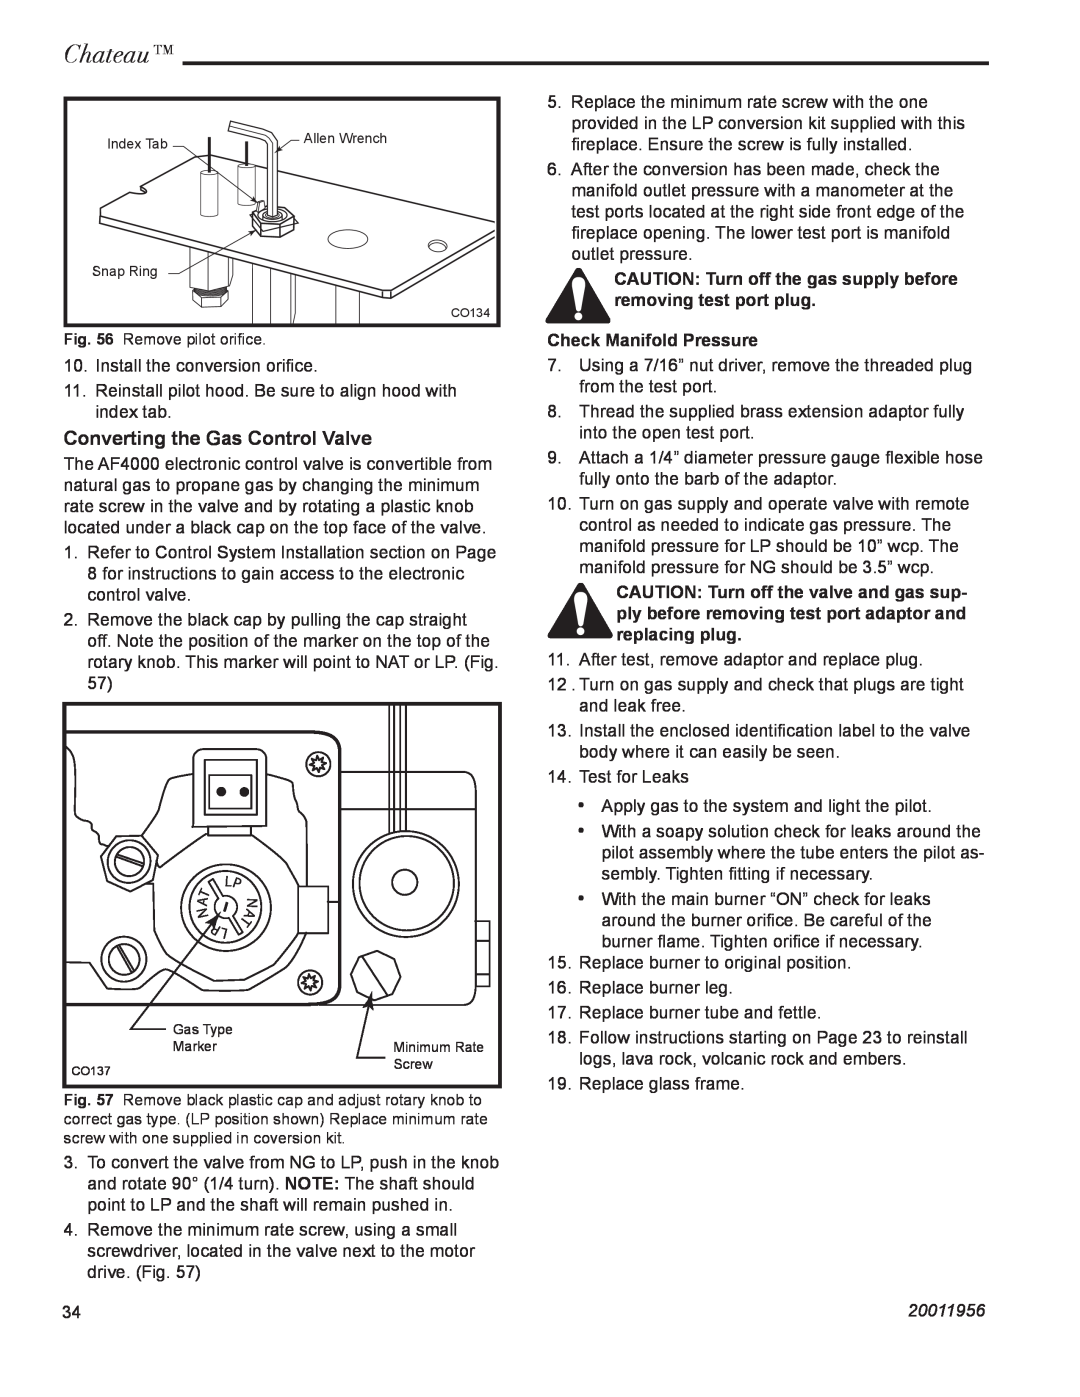 Vermont Casting DVT44 installation instructions Chateau, Converting the Gas Control Valve, 20011956 